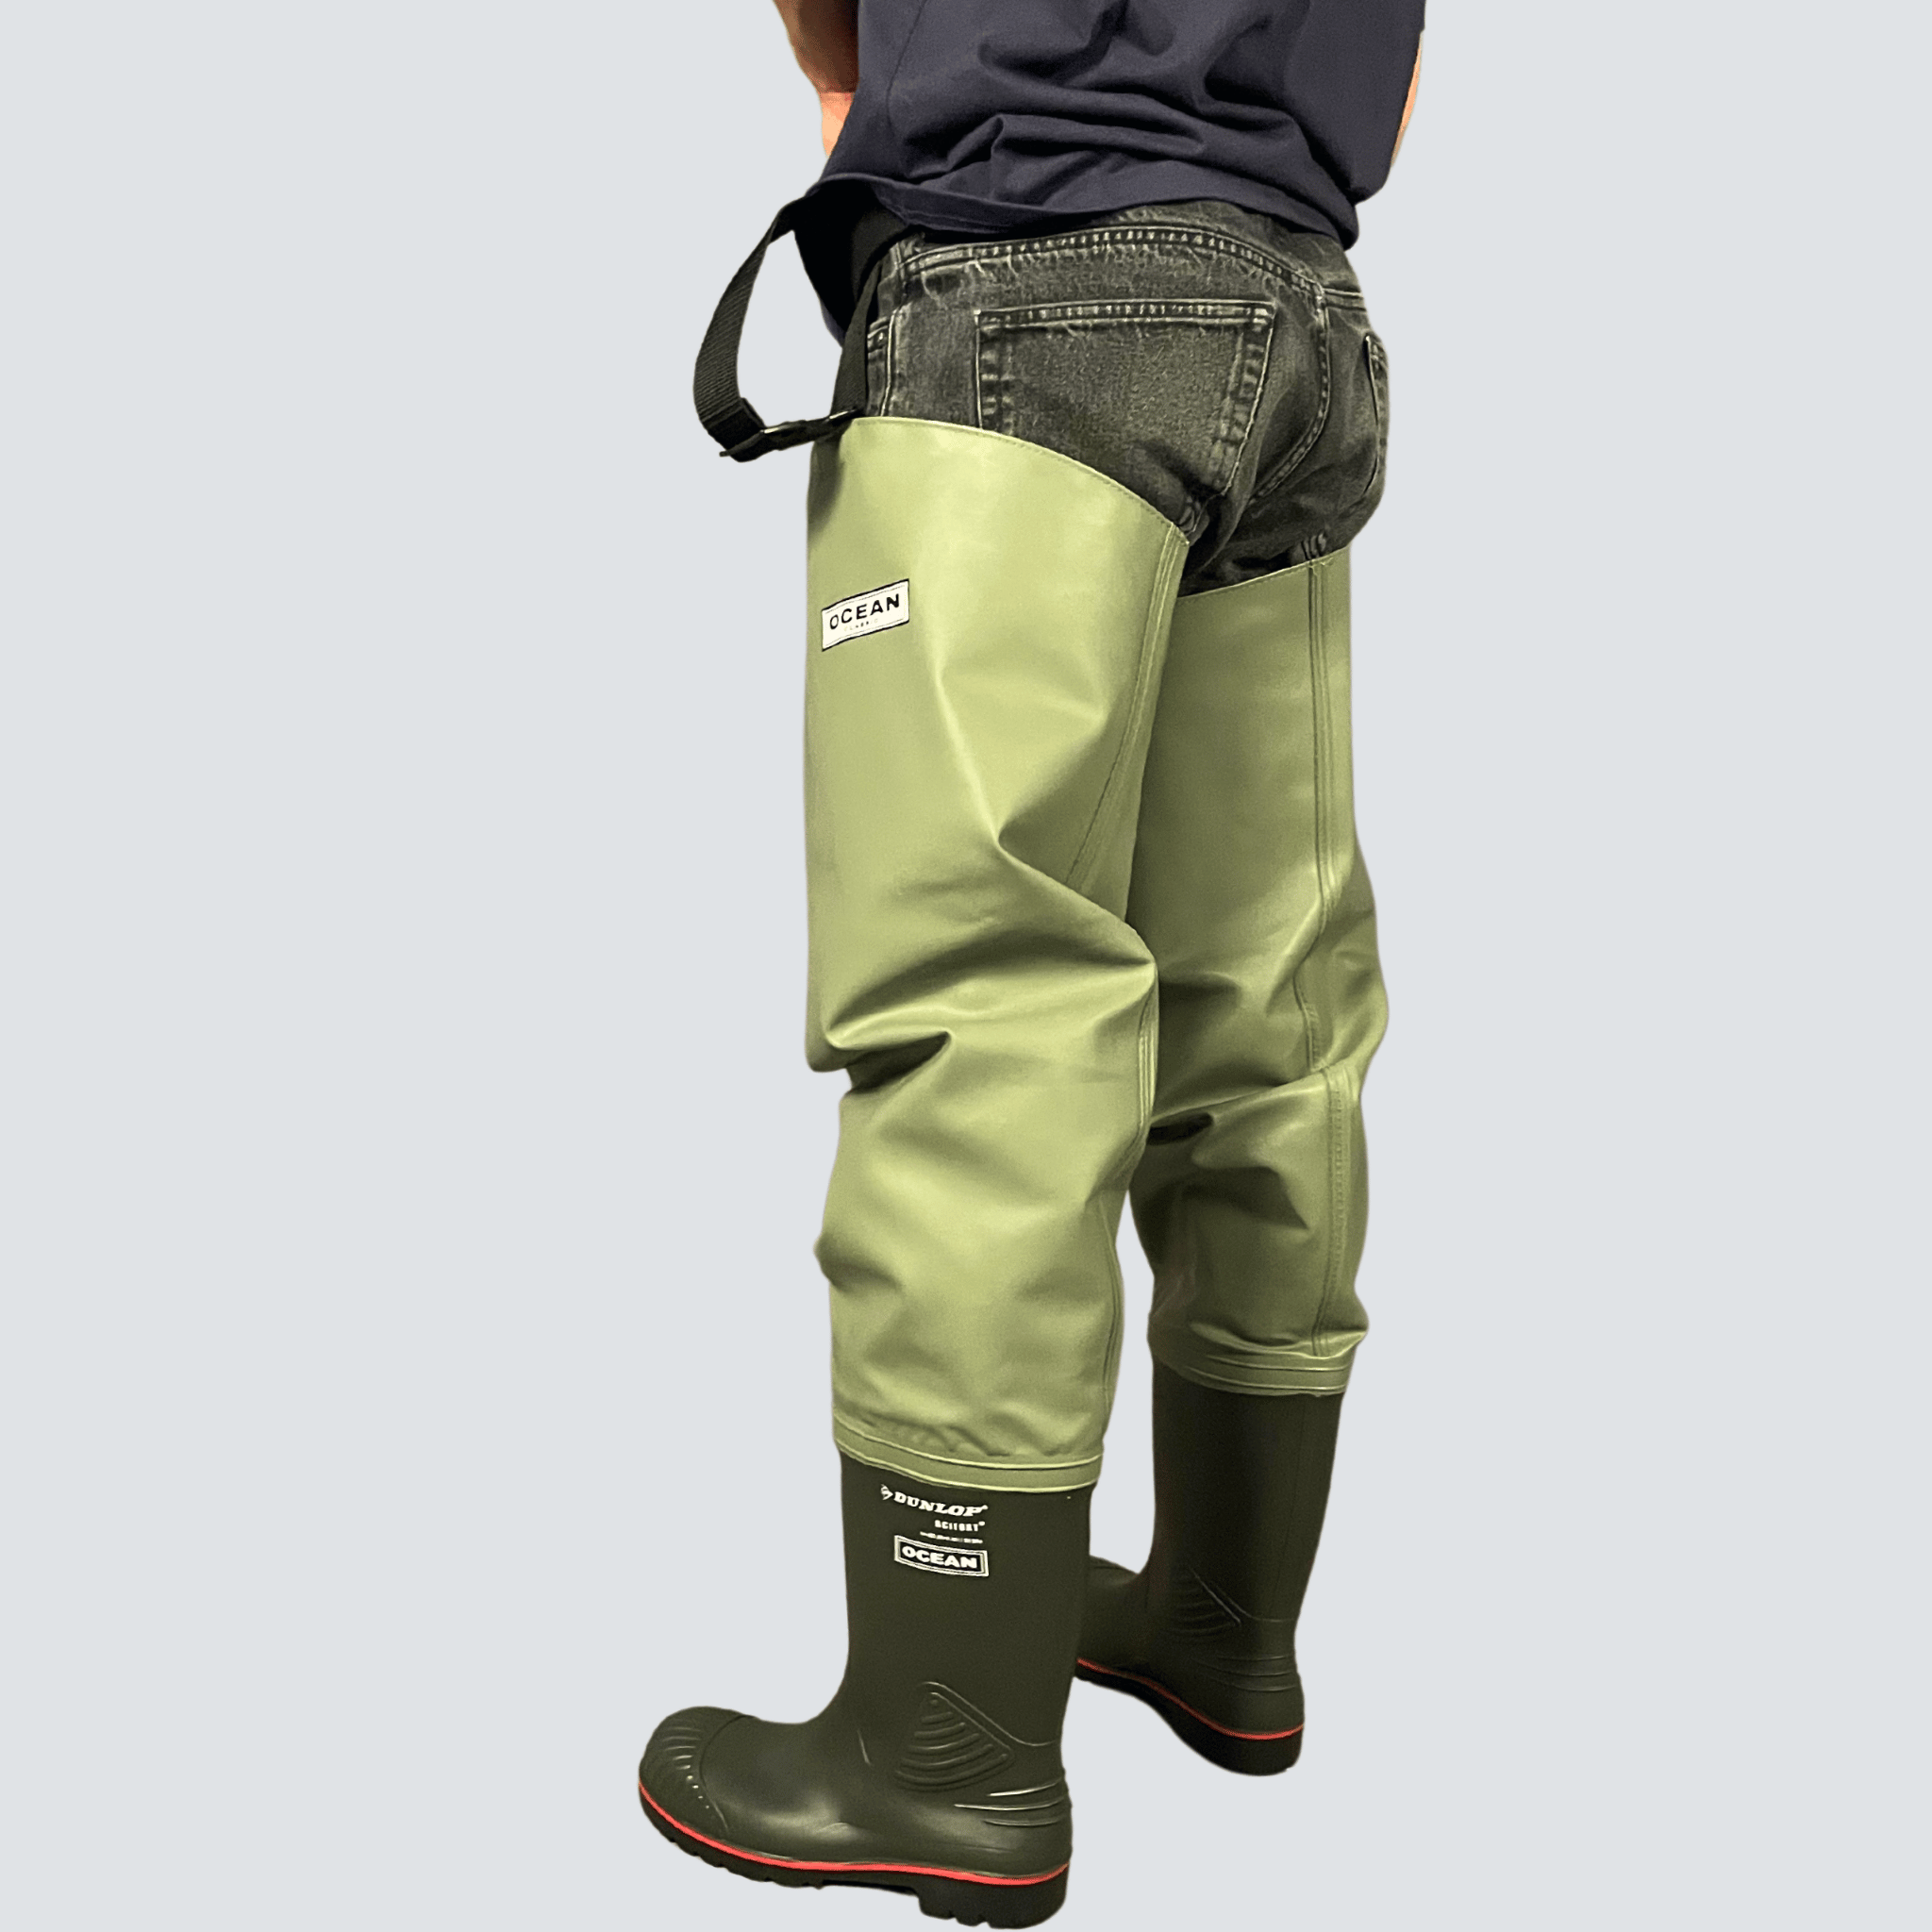 Classic W. S5 Thigh Waders